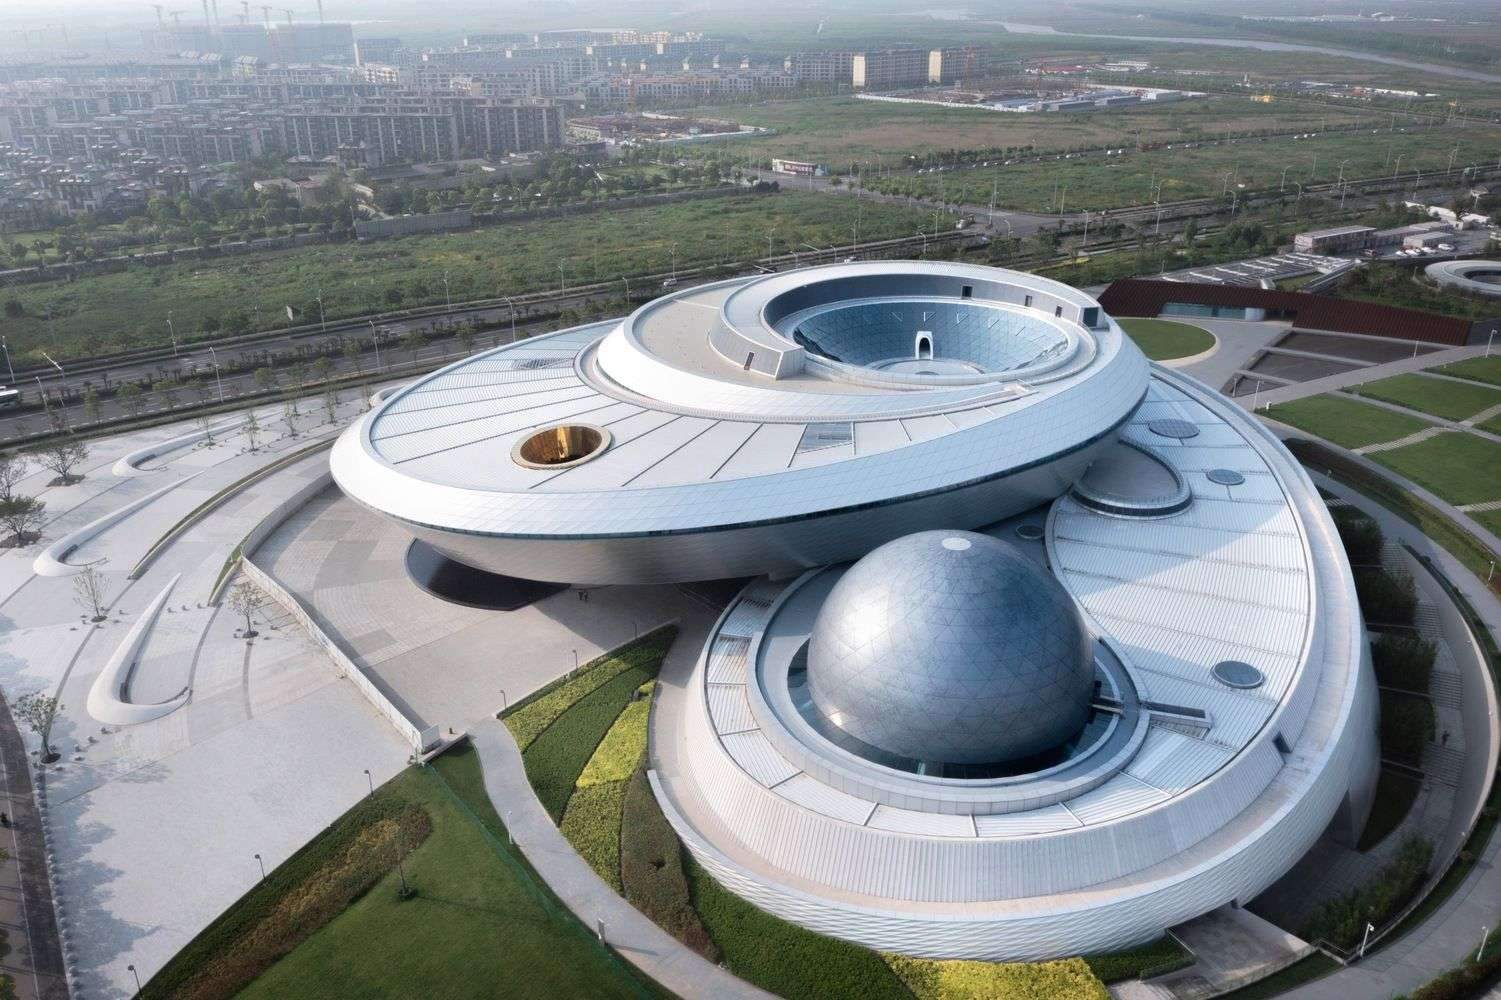 Shanghai Astronomy Museum: An Immersive Monumental Exploration Designed by Ennead Architects